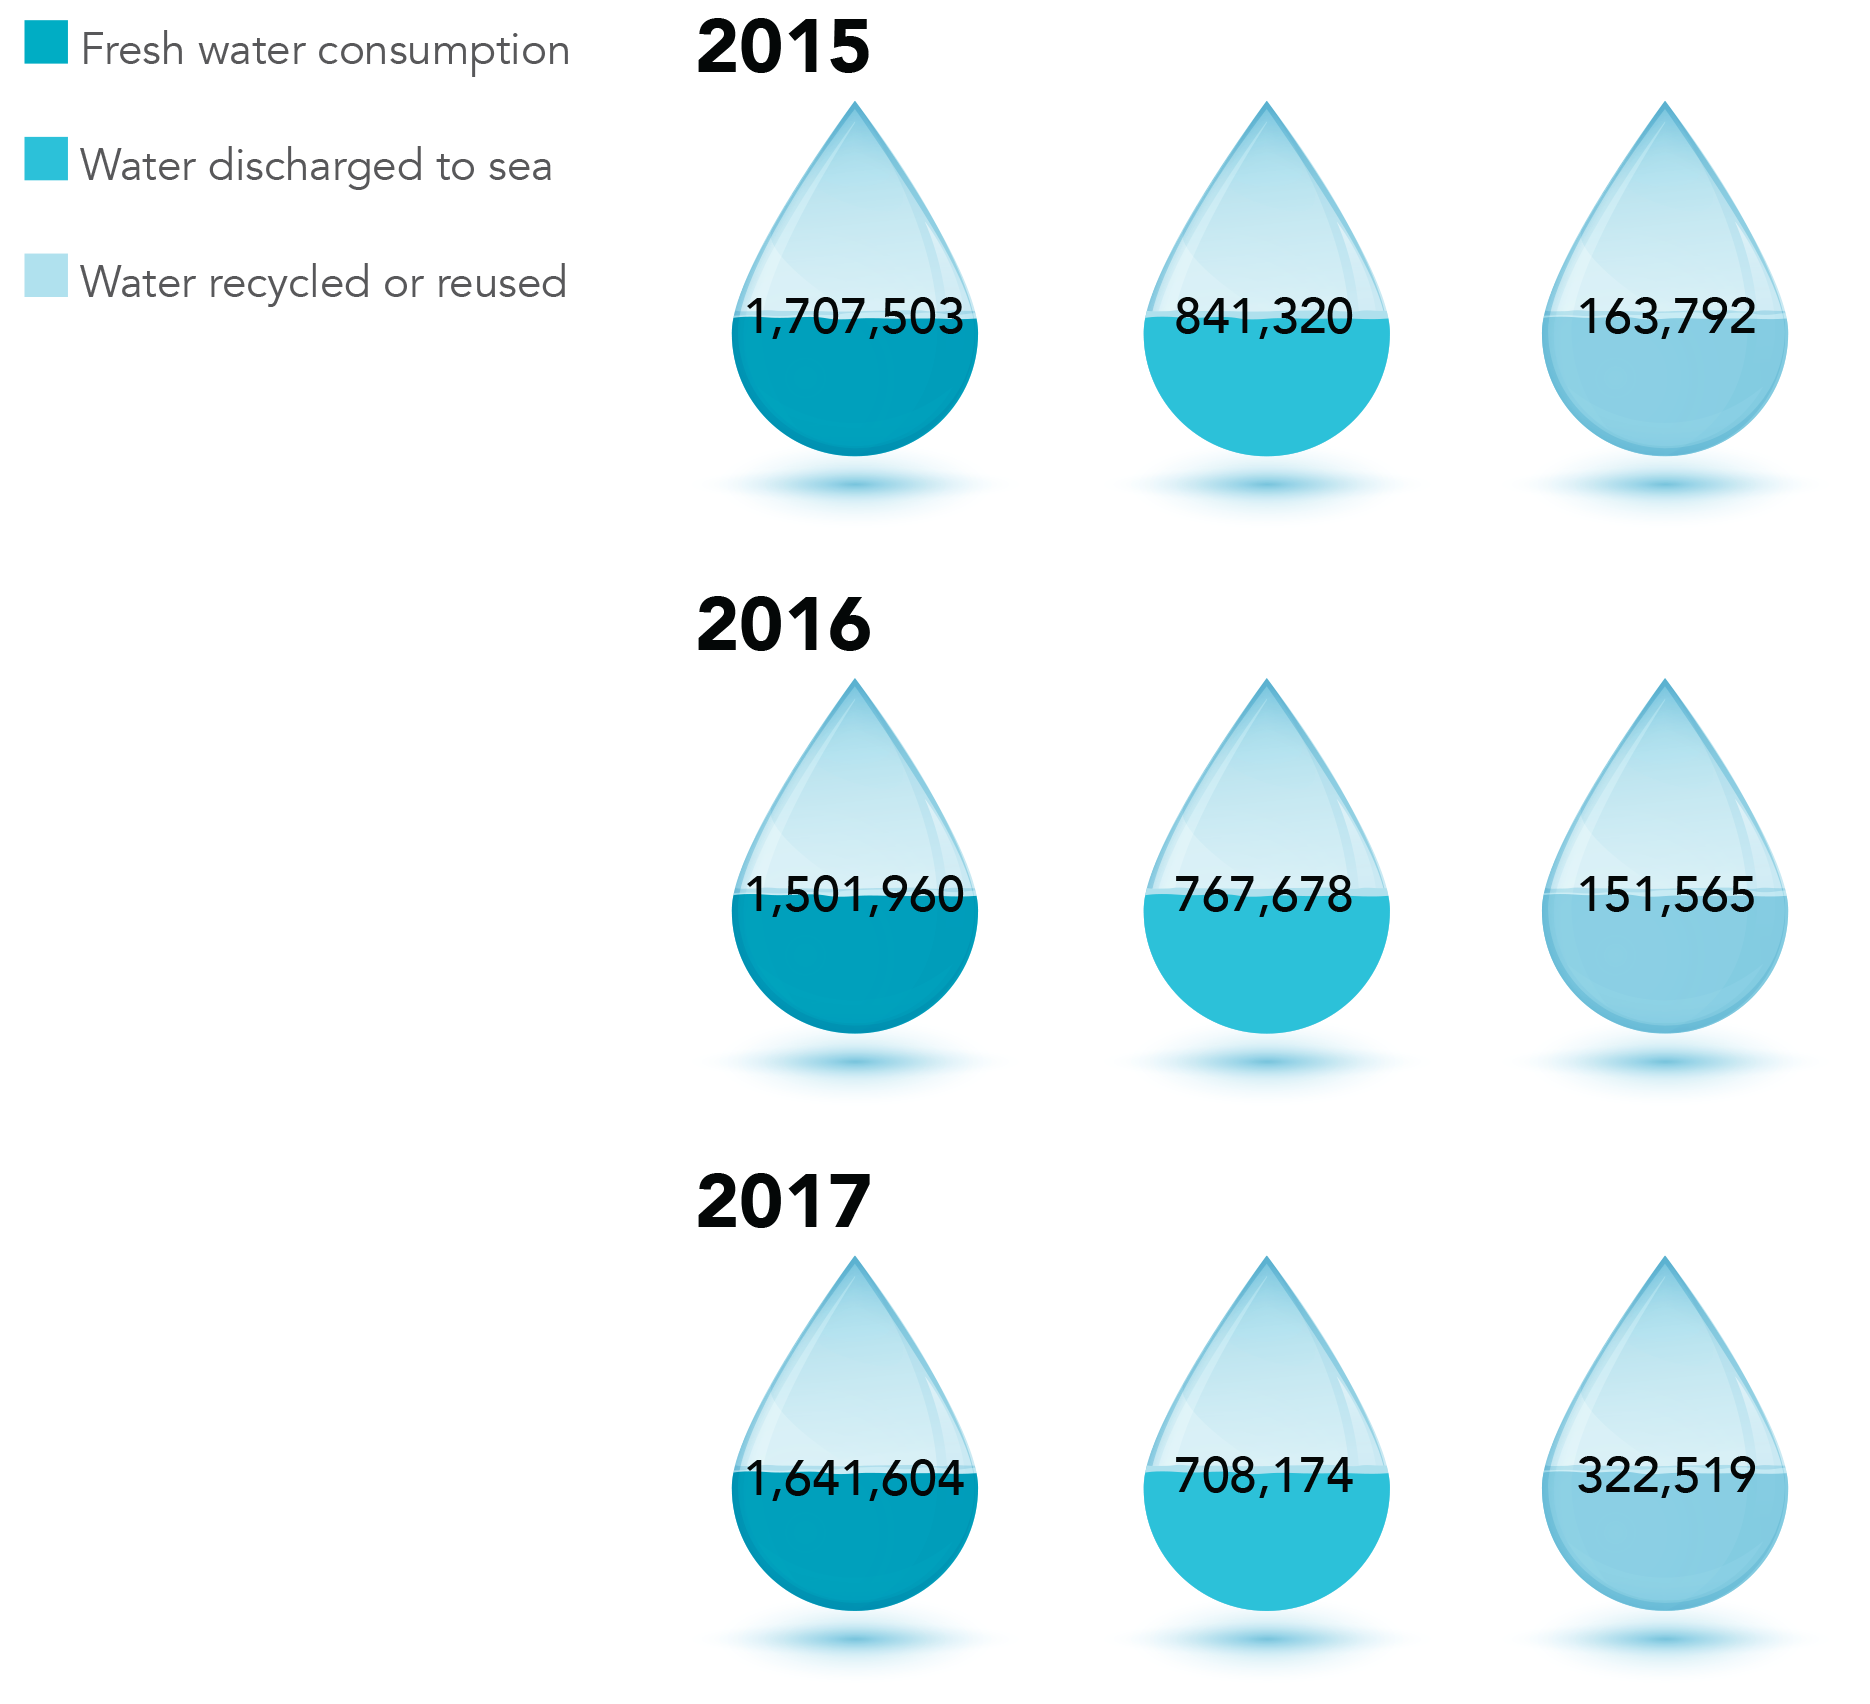 Water Consumption and Efﬂuents